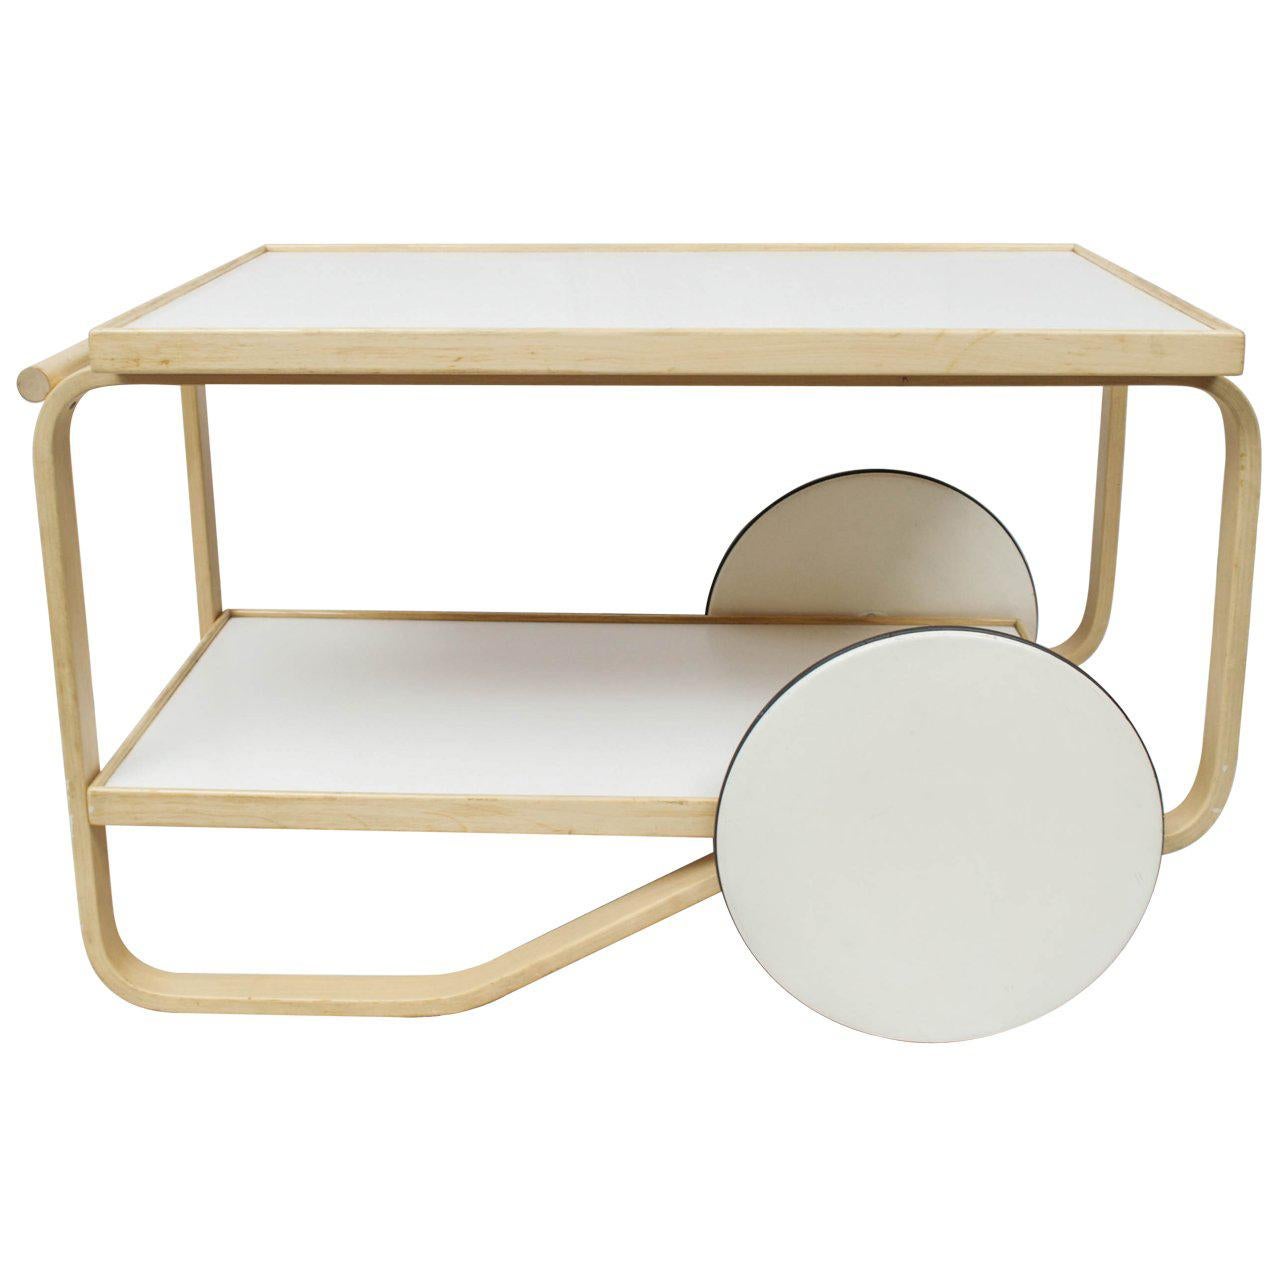 Artek Tea Trolley 901 Bar Cart in Birchwood with White Top and Wheels For Sale